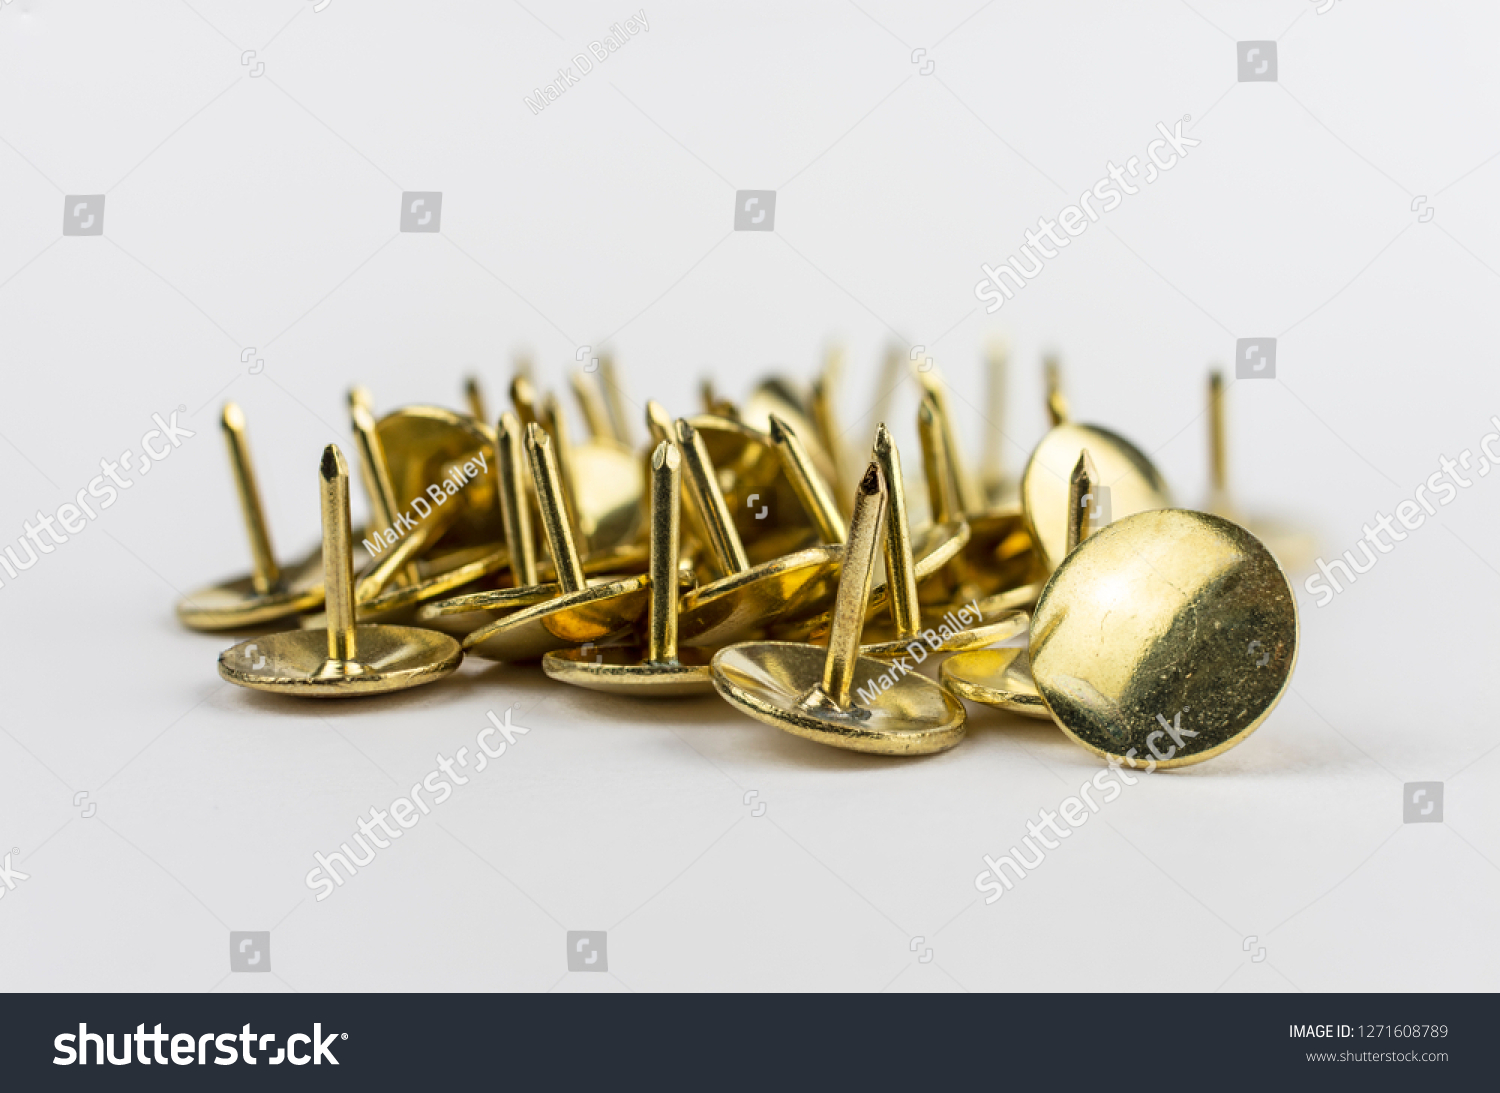 Drawing Pins Cluster Brass Drawing Pins Stock Photo 1271608789 ...